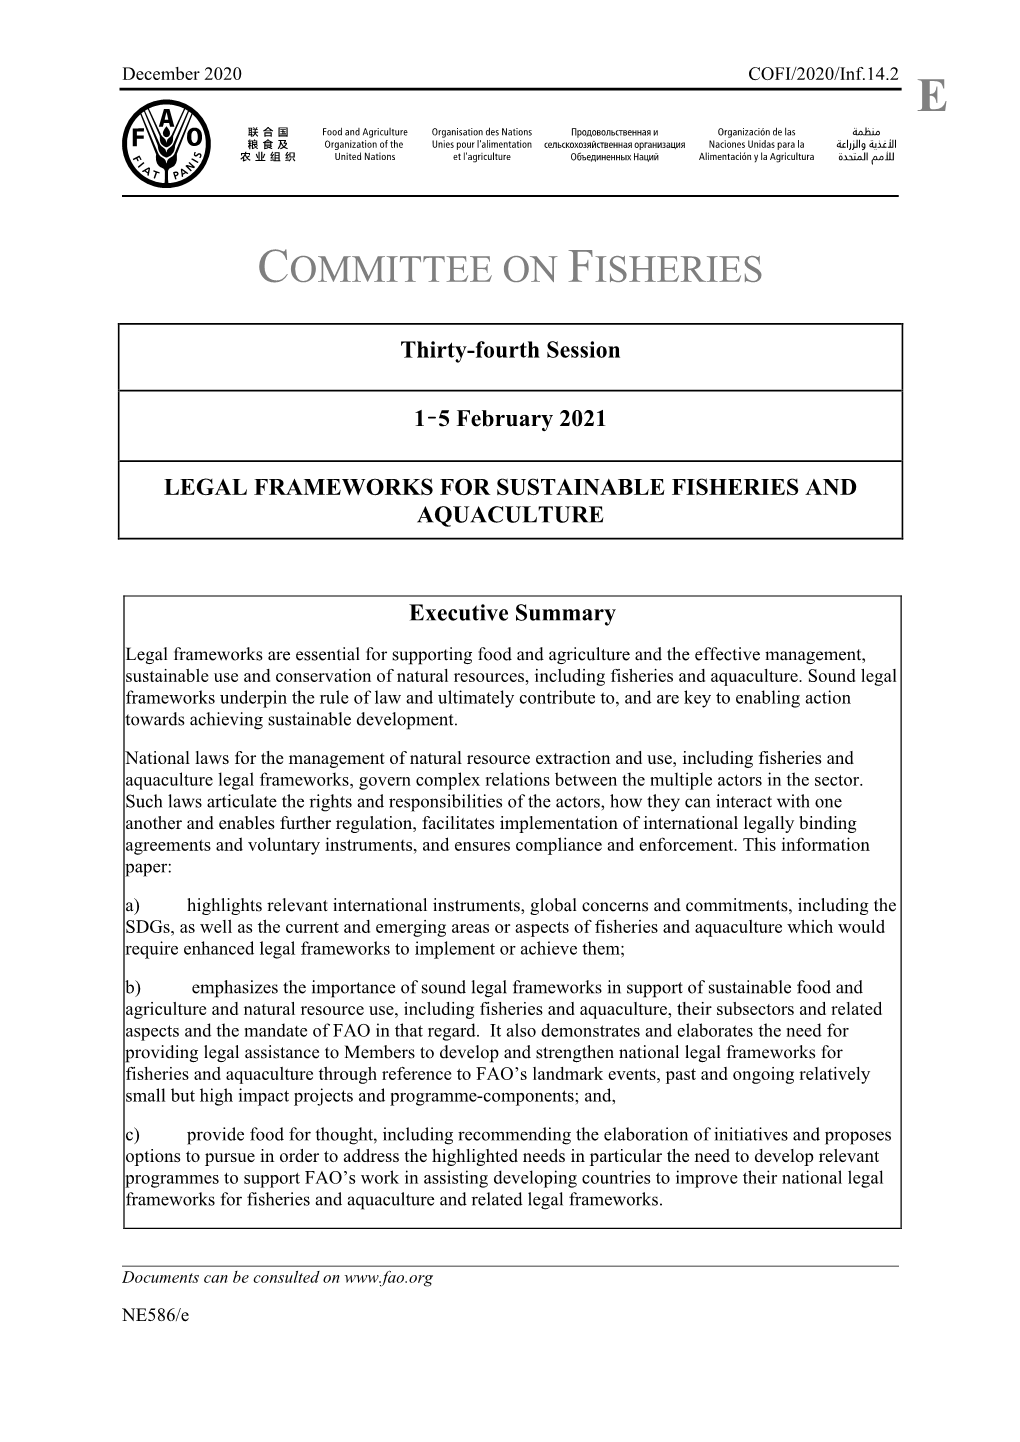 Legal Frameworks for Sustainable Fisheries and Aquaculture